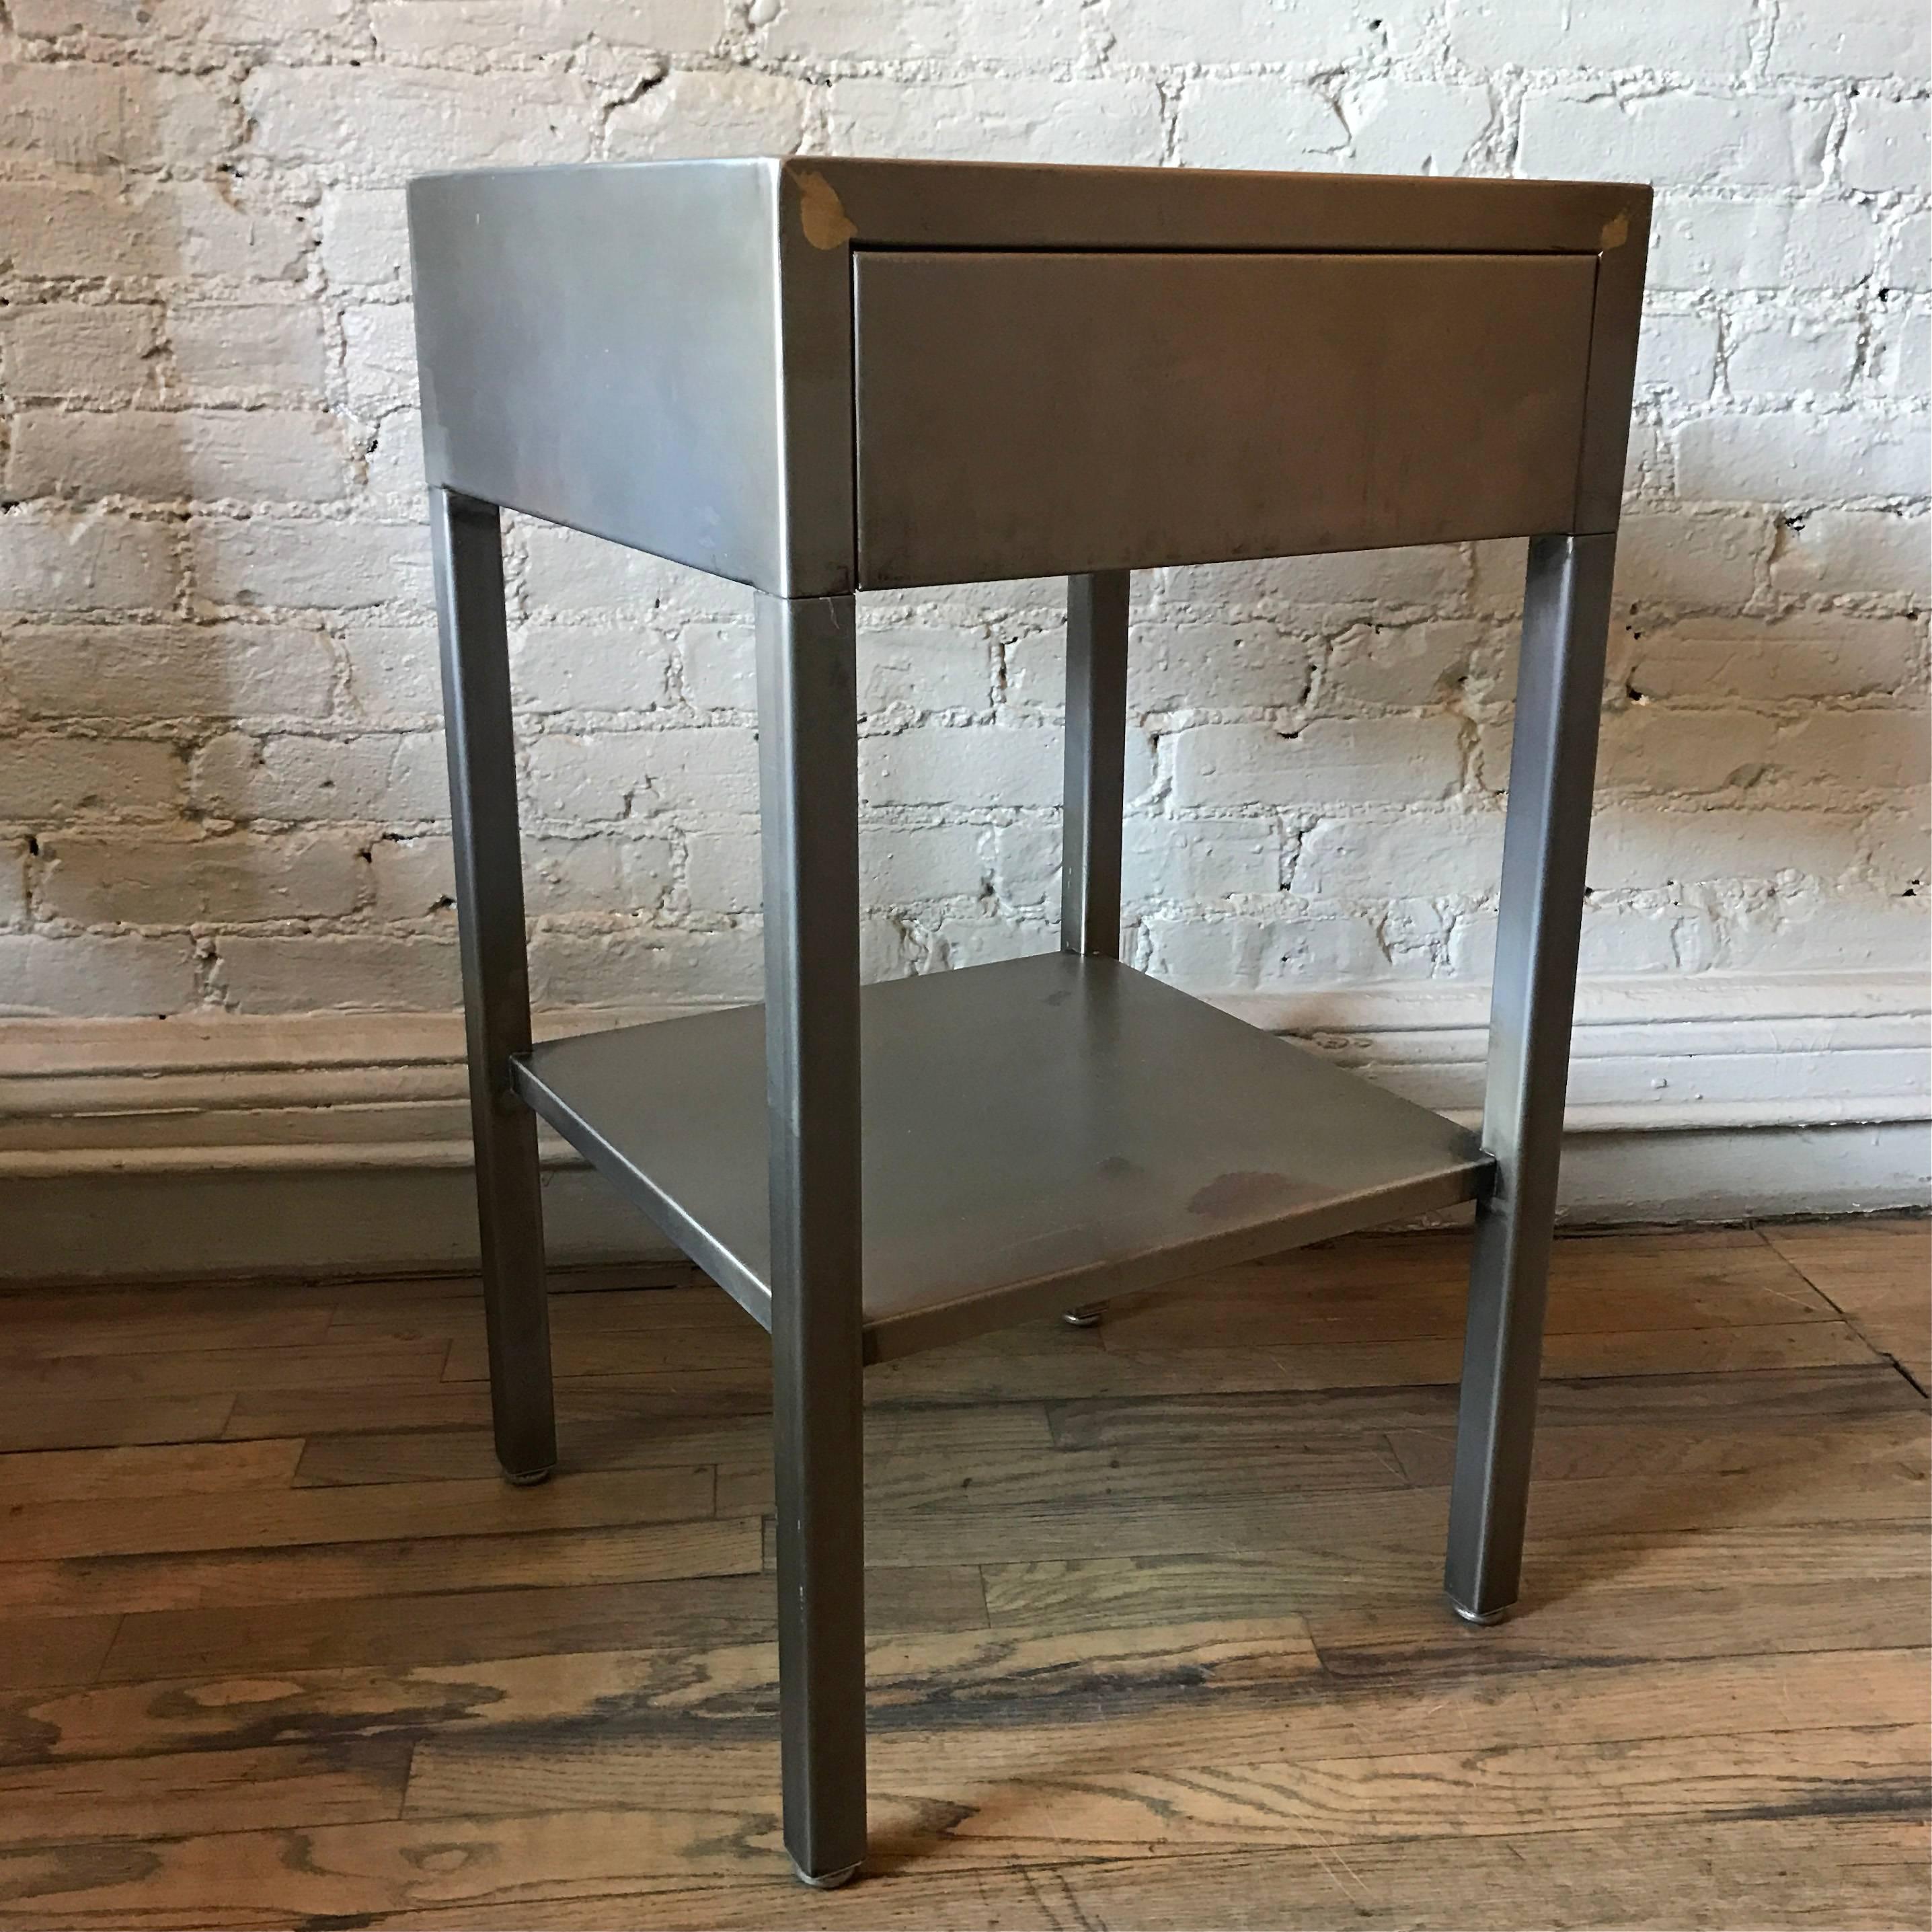 Mid-Century, Machine Age, Industrial, streamlined, side table or nightstand by Superior Sleeprite Corp, Chicago, IL is newly restored in a brushed steel finish.